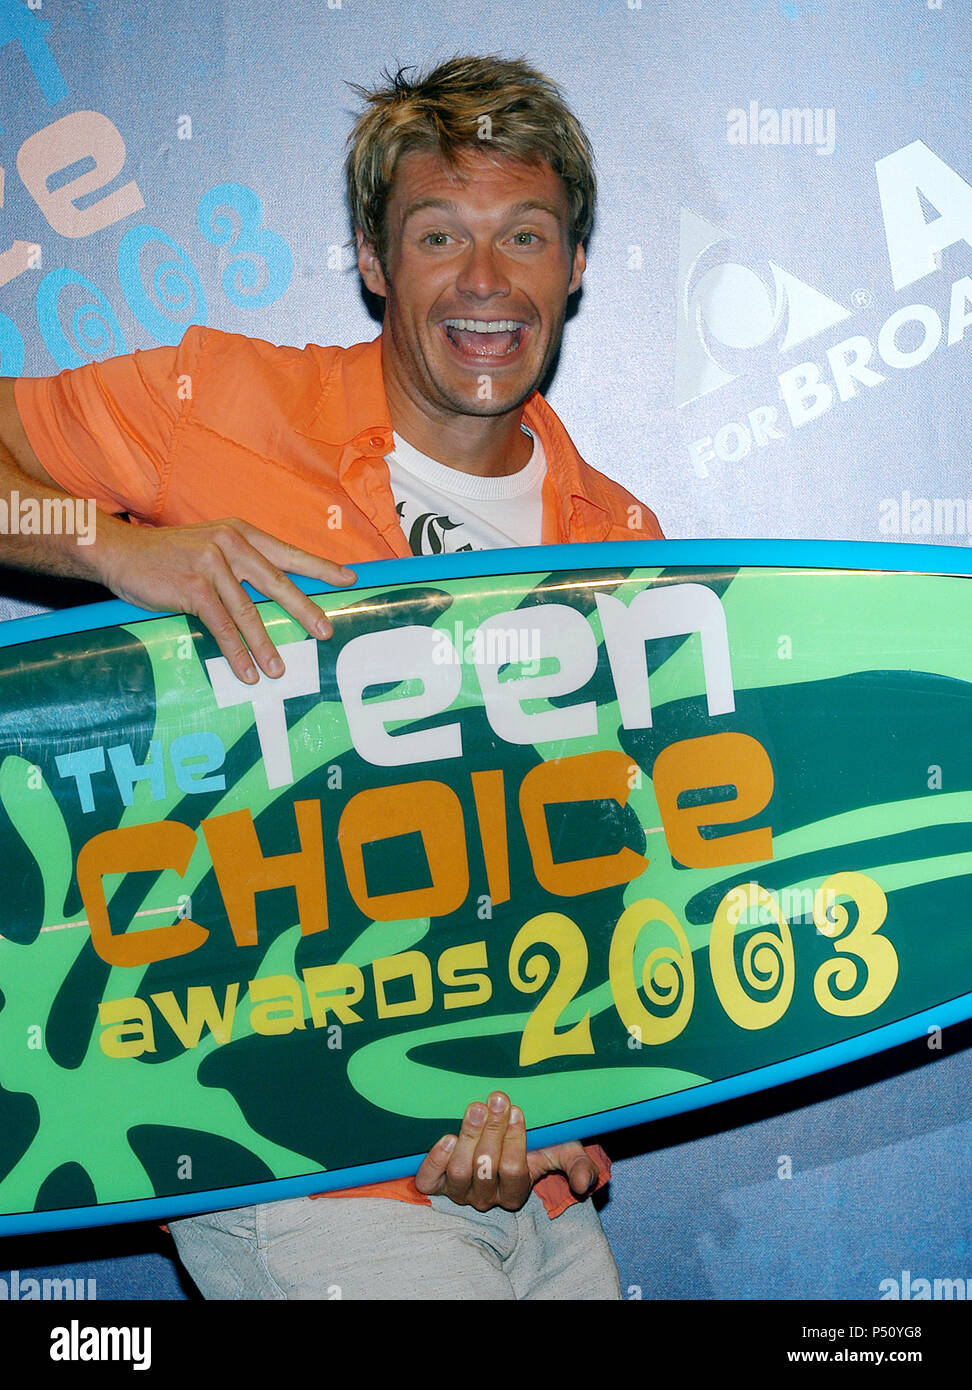 Ryan Seacrest backstage at the ' Teen Choice Awards 2003 ' at the Universal Amphitheatre in Los Angeles. August 2, 2003.          -            SeacrestRyan084.jpgSeacrestRyan084  Event in Hollywood Life - California, Red Carpet Event, USA, Film Industry, Celebrities, Photography, Bestof, Arts Culture and Entertainment, Topix Celebrities fashion, Best of, Hollywood Life, Event in Hollywood Life - California,  backstage trophy, Awards show, movie celebrities, TV celebrities, Music celebrities, Topix, Bestof, Arts Culture and Entertainment, Photography,    inquiry tsuni@Gamma-USA.com , Credit Tsu Stock Photo